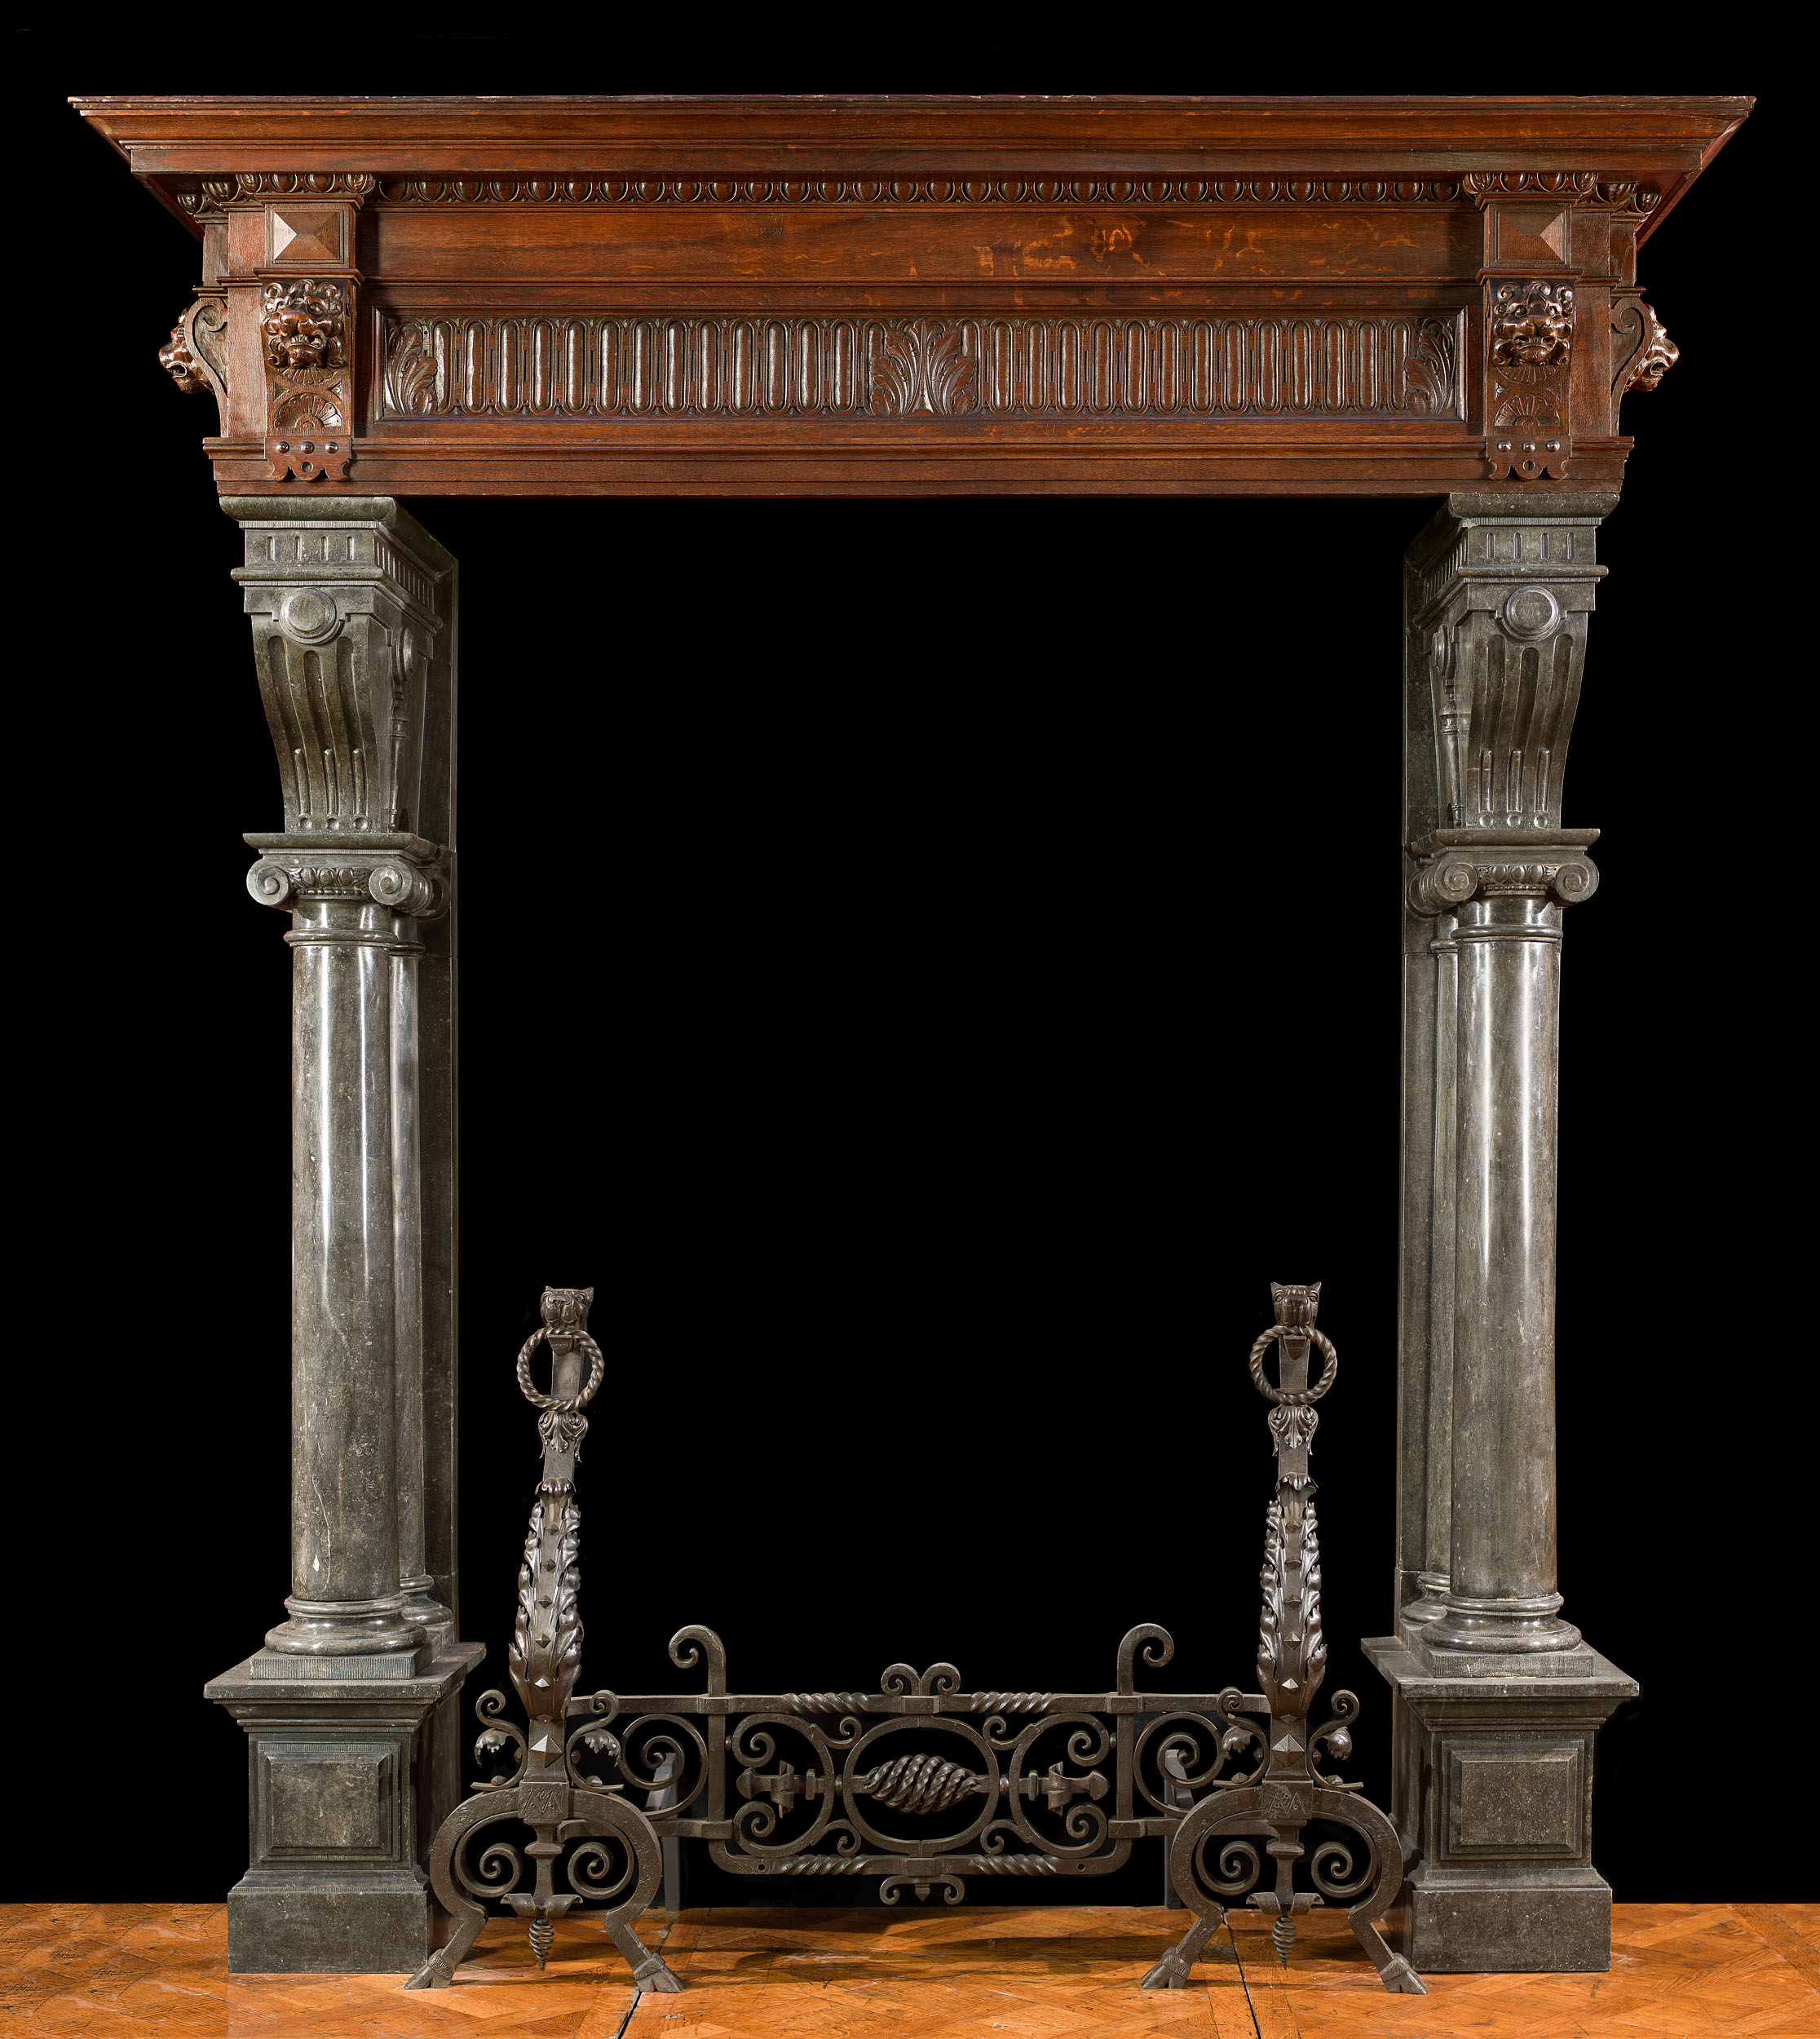 A Belgian Stone & Wood Antique Fireplace